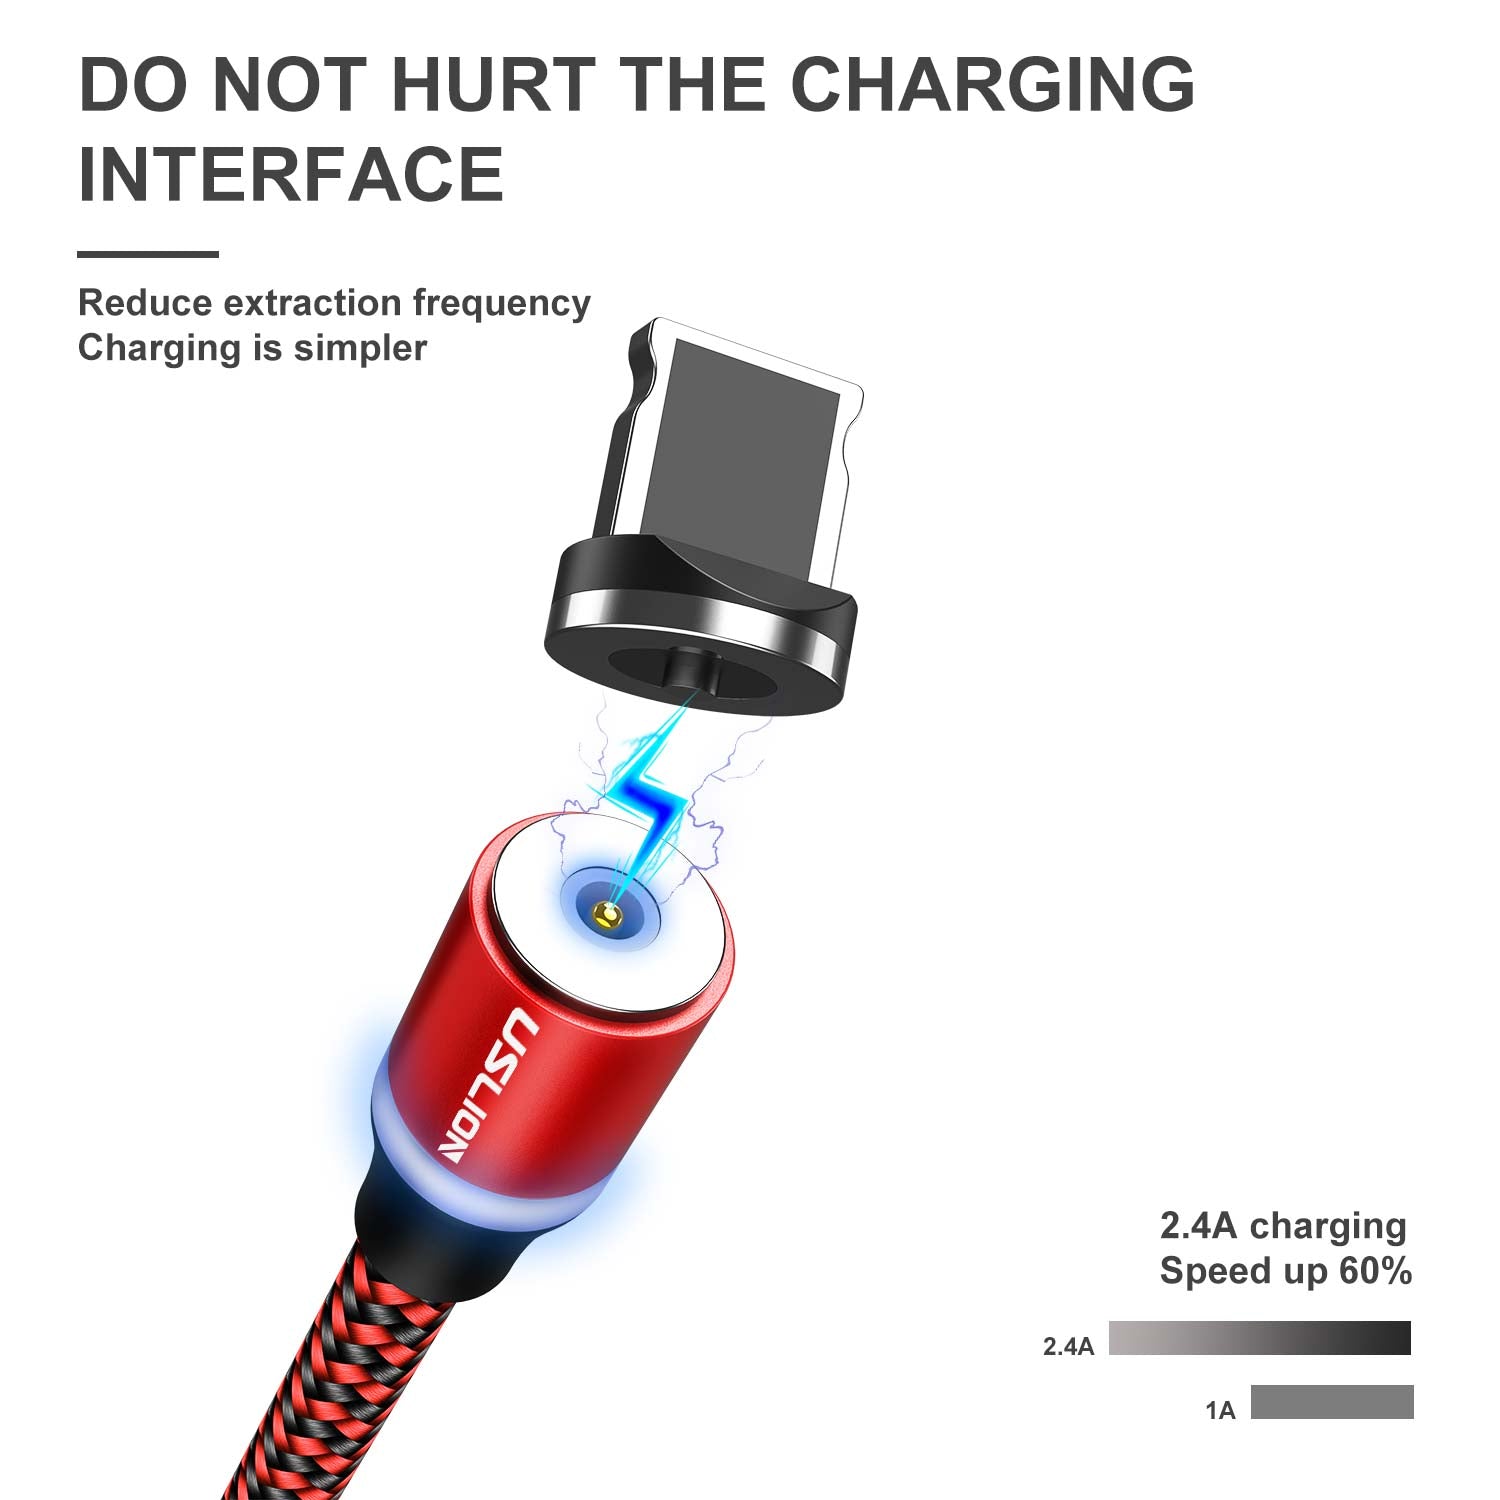 USLION Magnetic Cable with LED